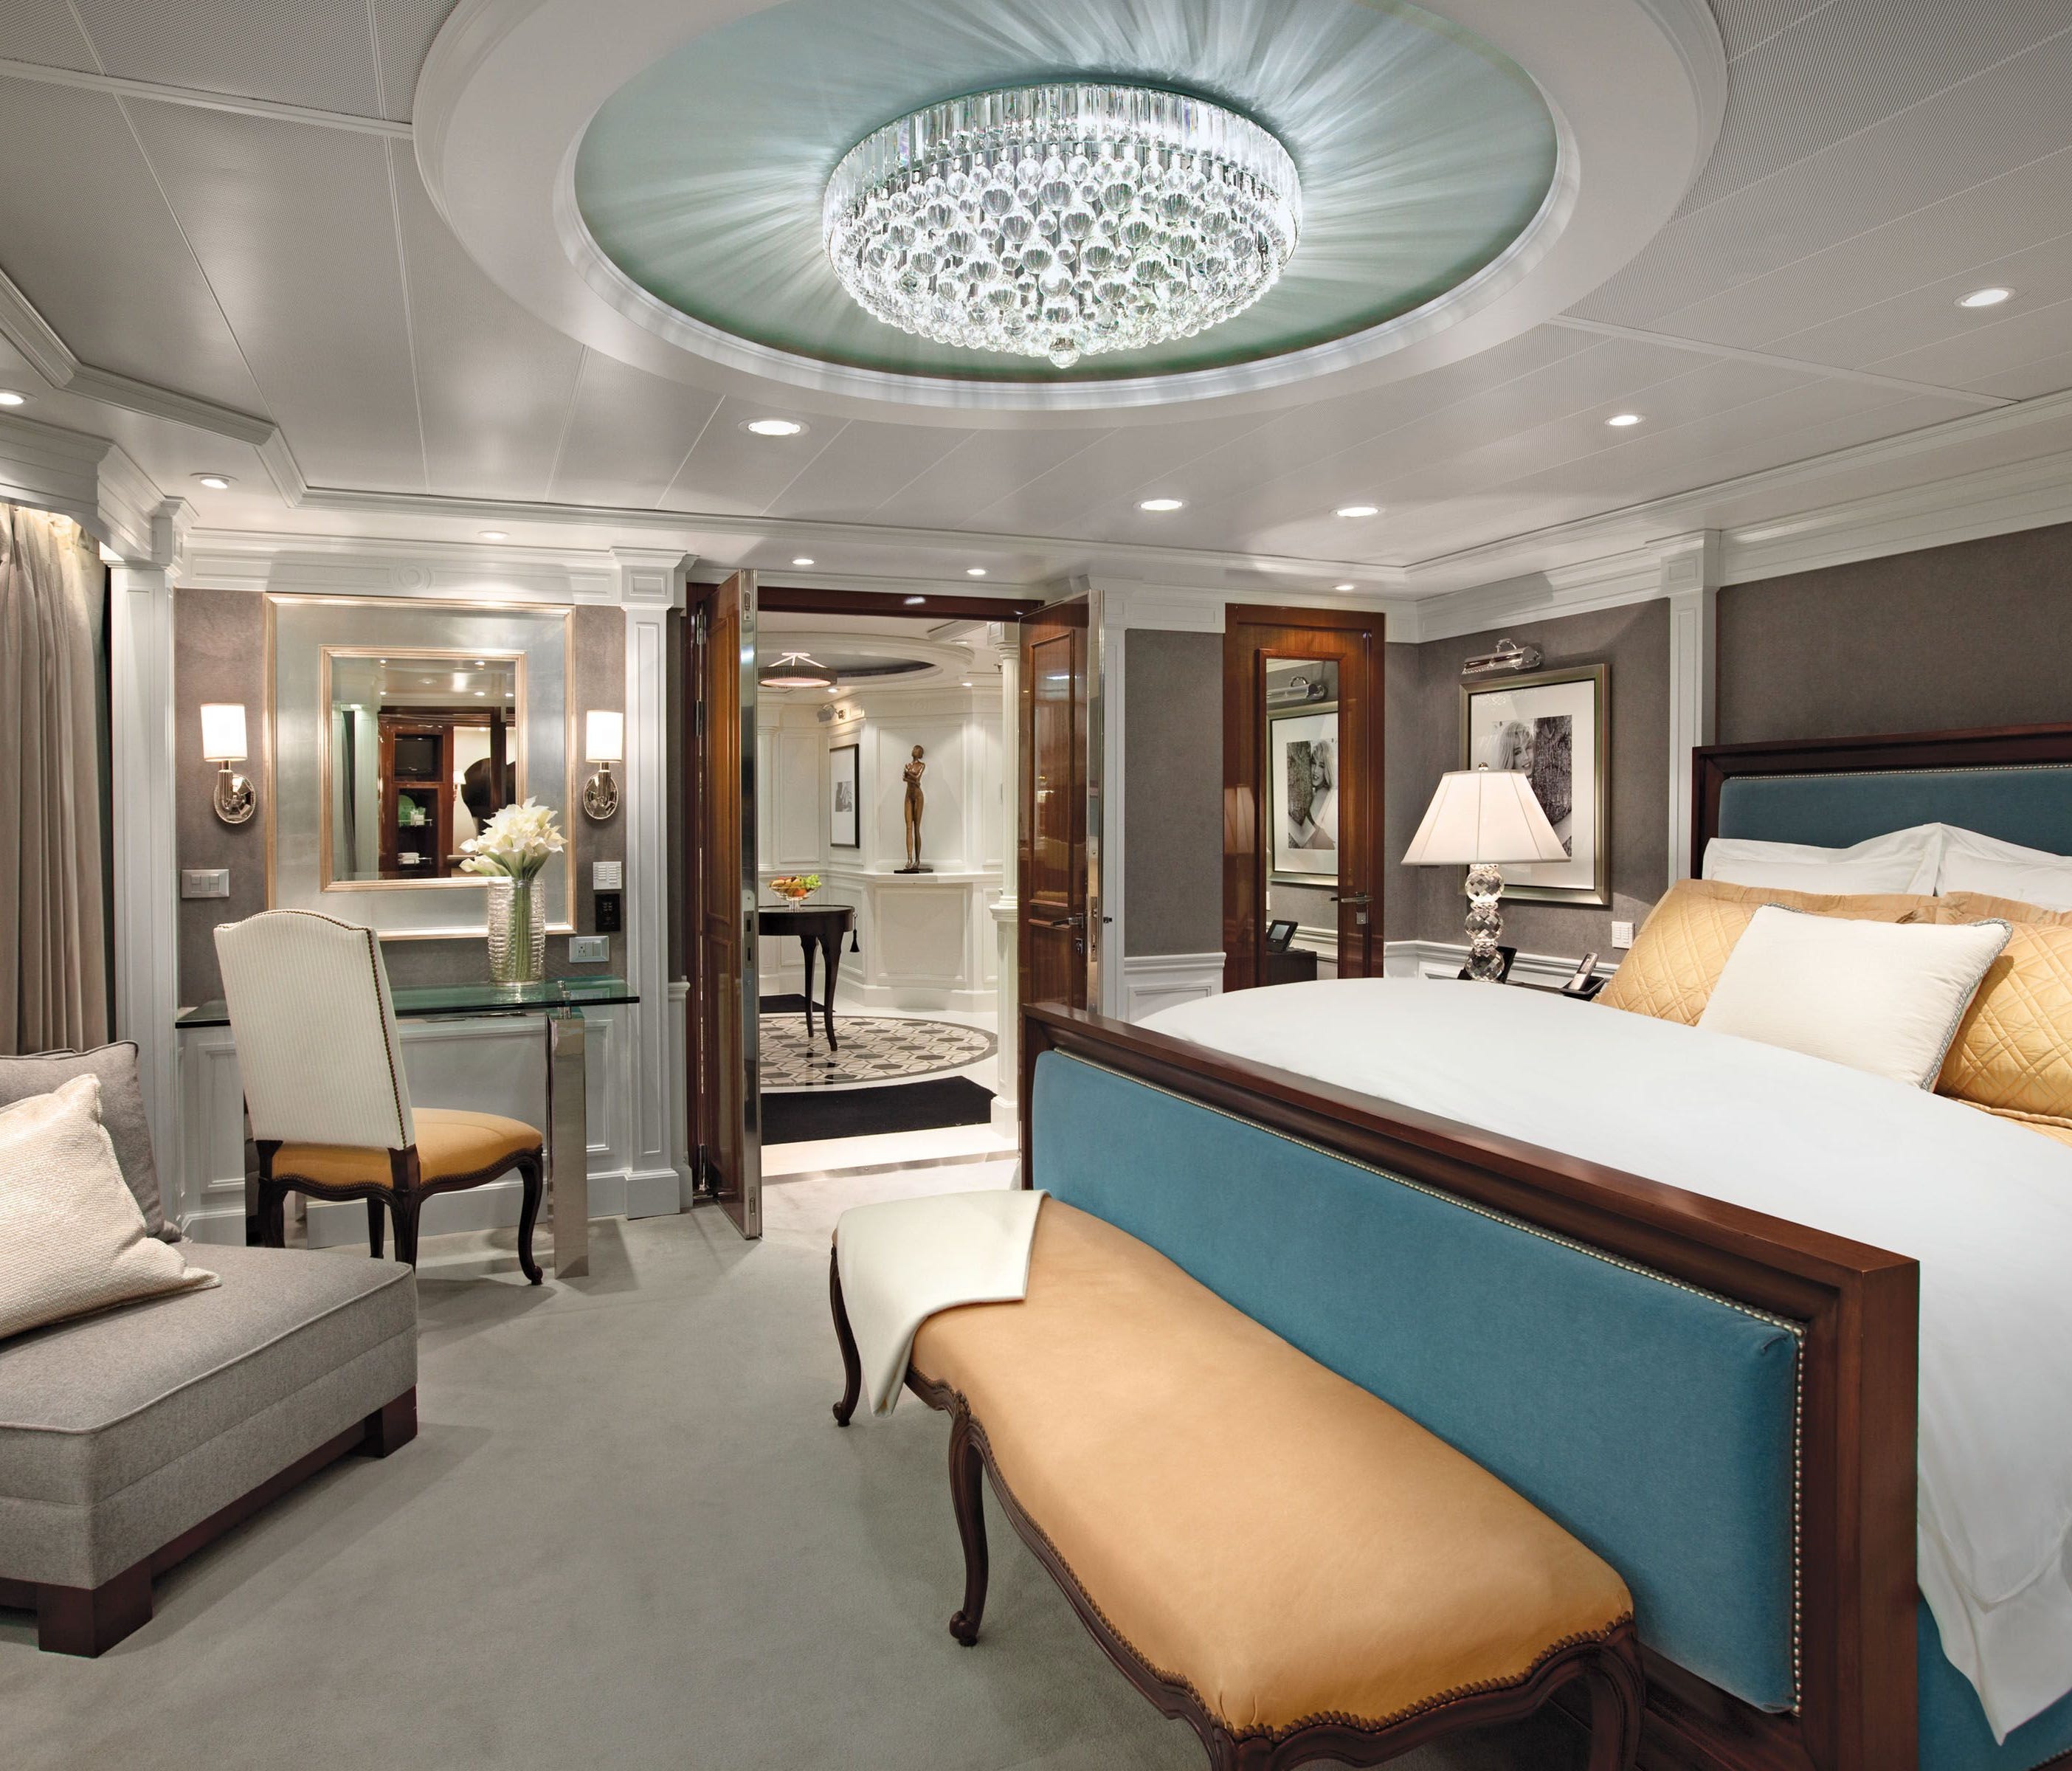 Oceania Cruises' Marina features a giant Owner's Suite decorated in Ralph Lauren furnishings.